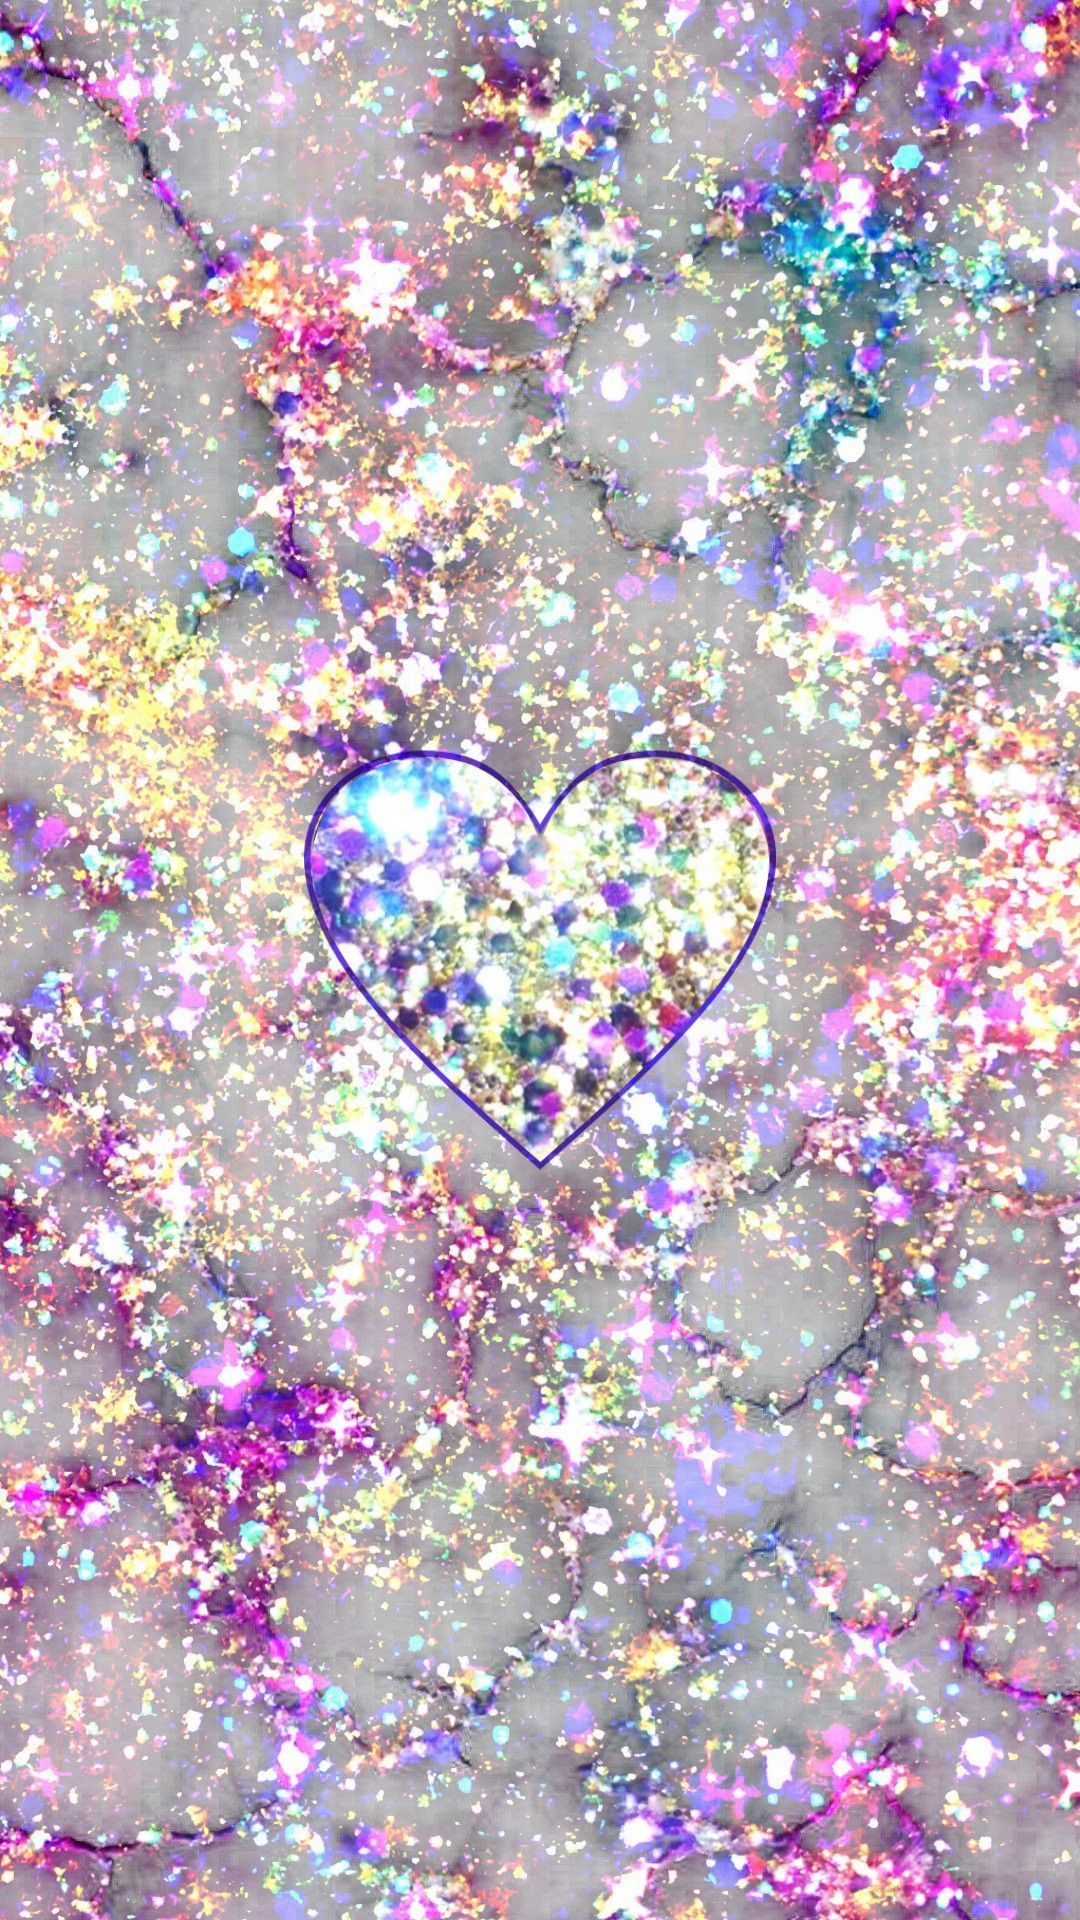 Glittery Marble Heart, made by me #purple #sparkly #wallpaper #background #sparkles #rainbow. iPhone wallpaper glitter, Heart iphone wallpaper, Bling wallpaper